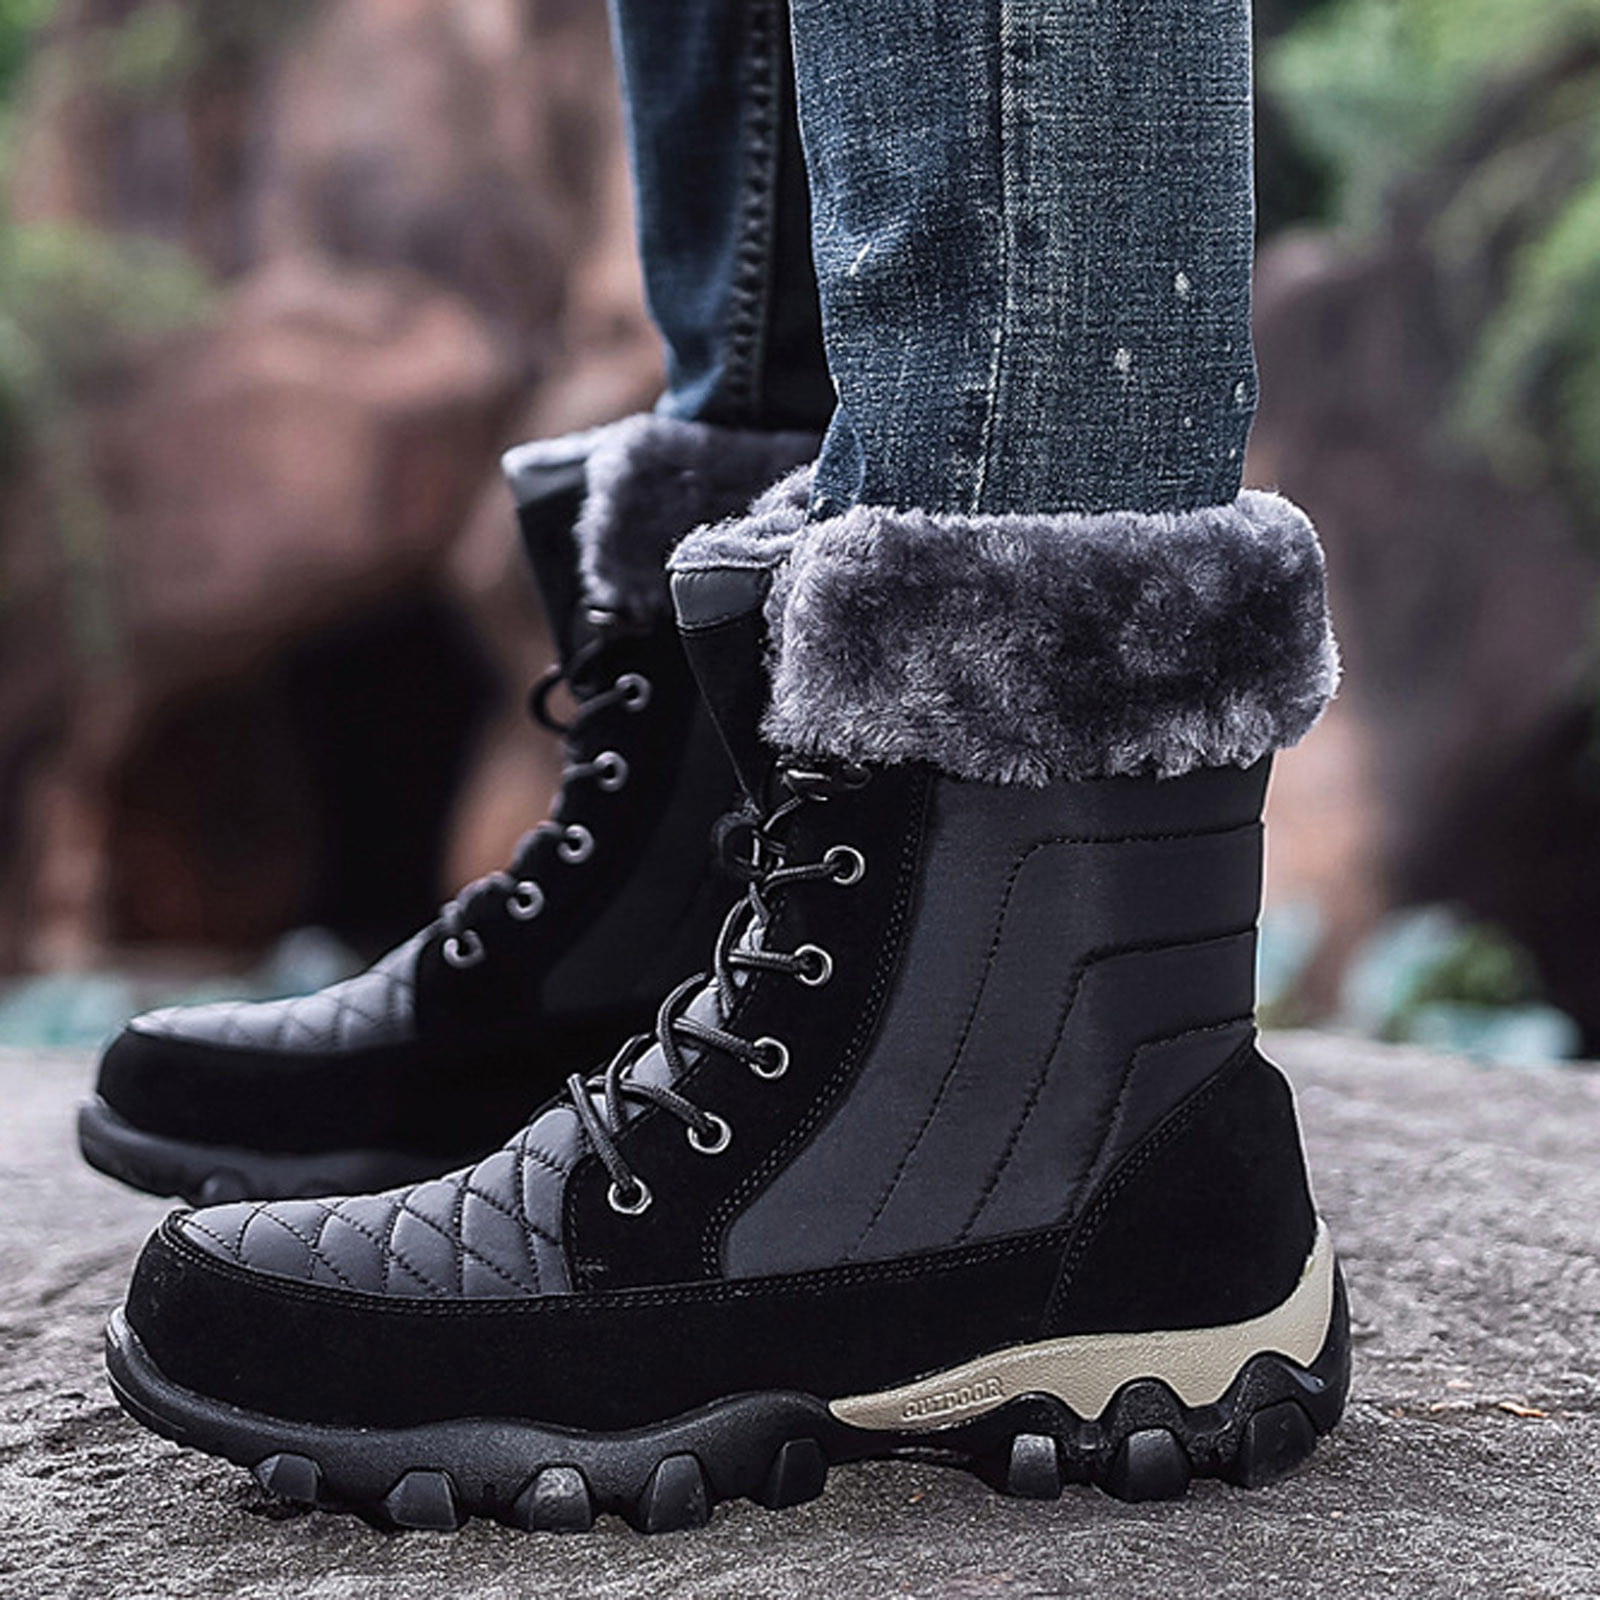 Winter Snow Boots for Women Warm Fur Lined Ankle Boots Comfortable Suede  Lace Up Booties Cute Flat Shoes - Walmart.com